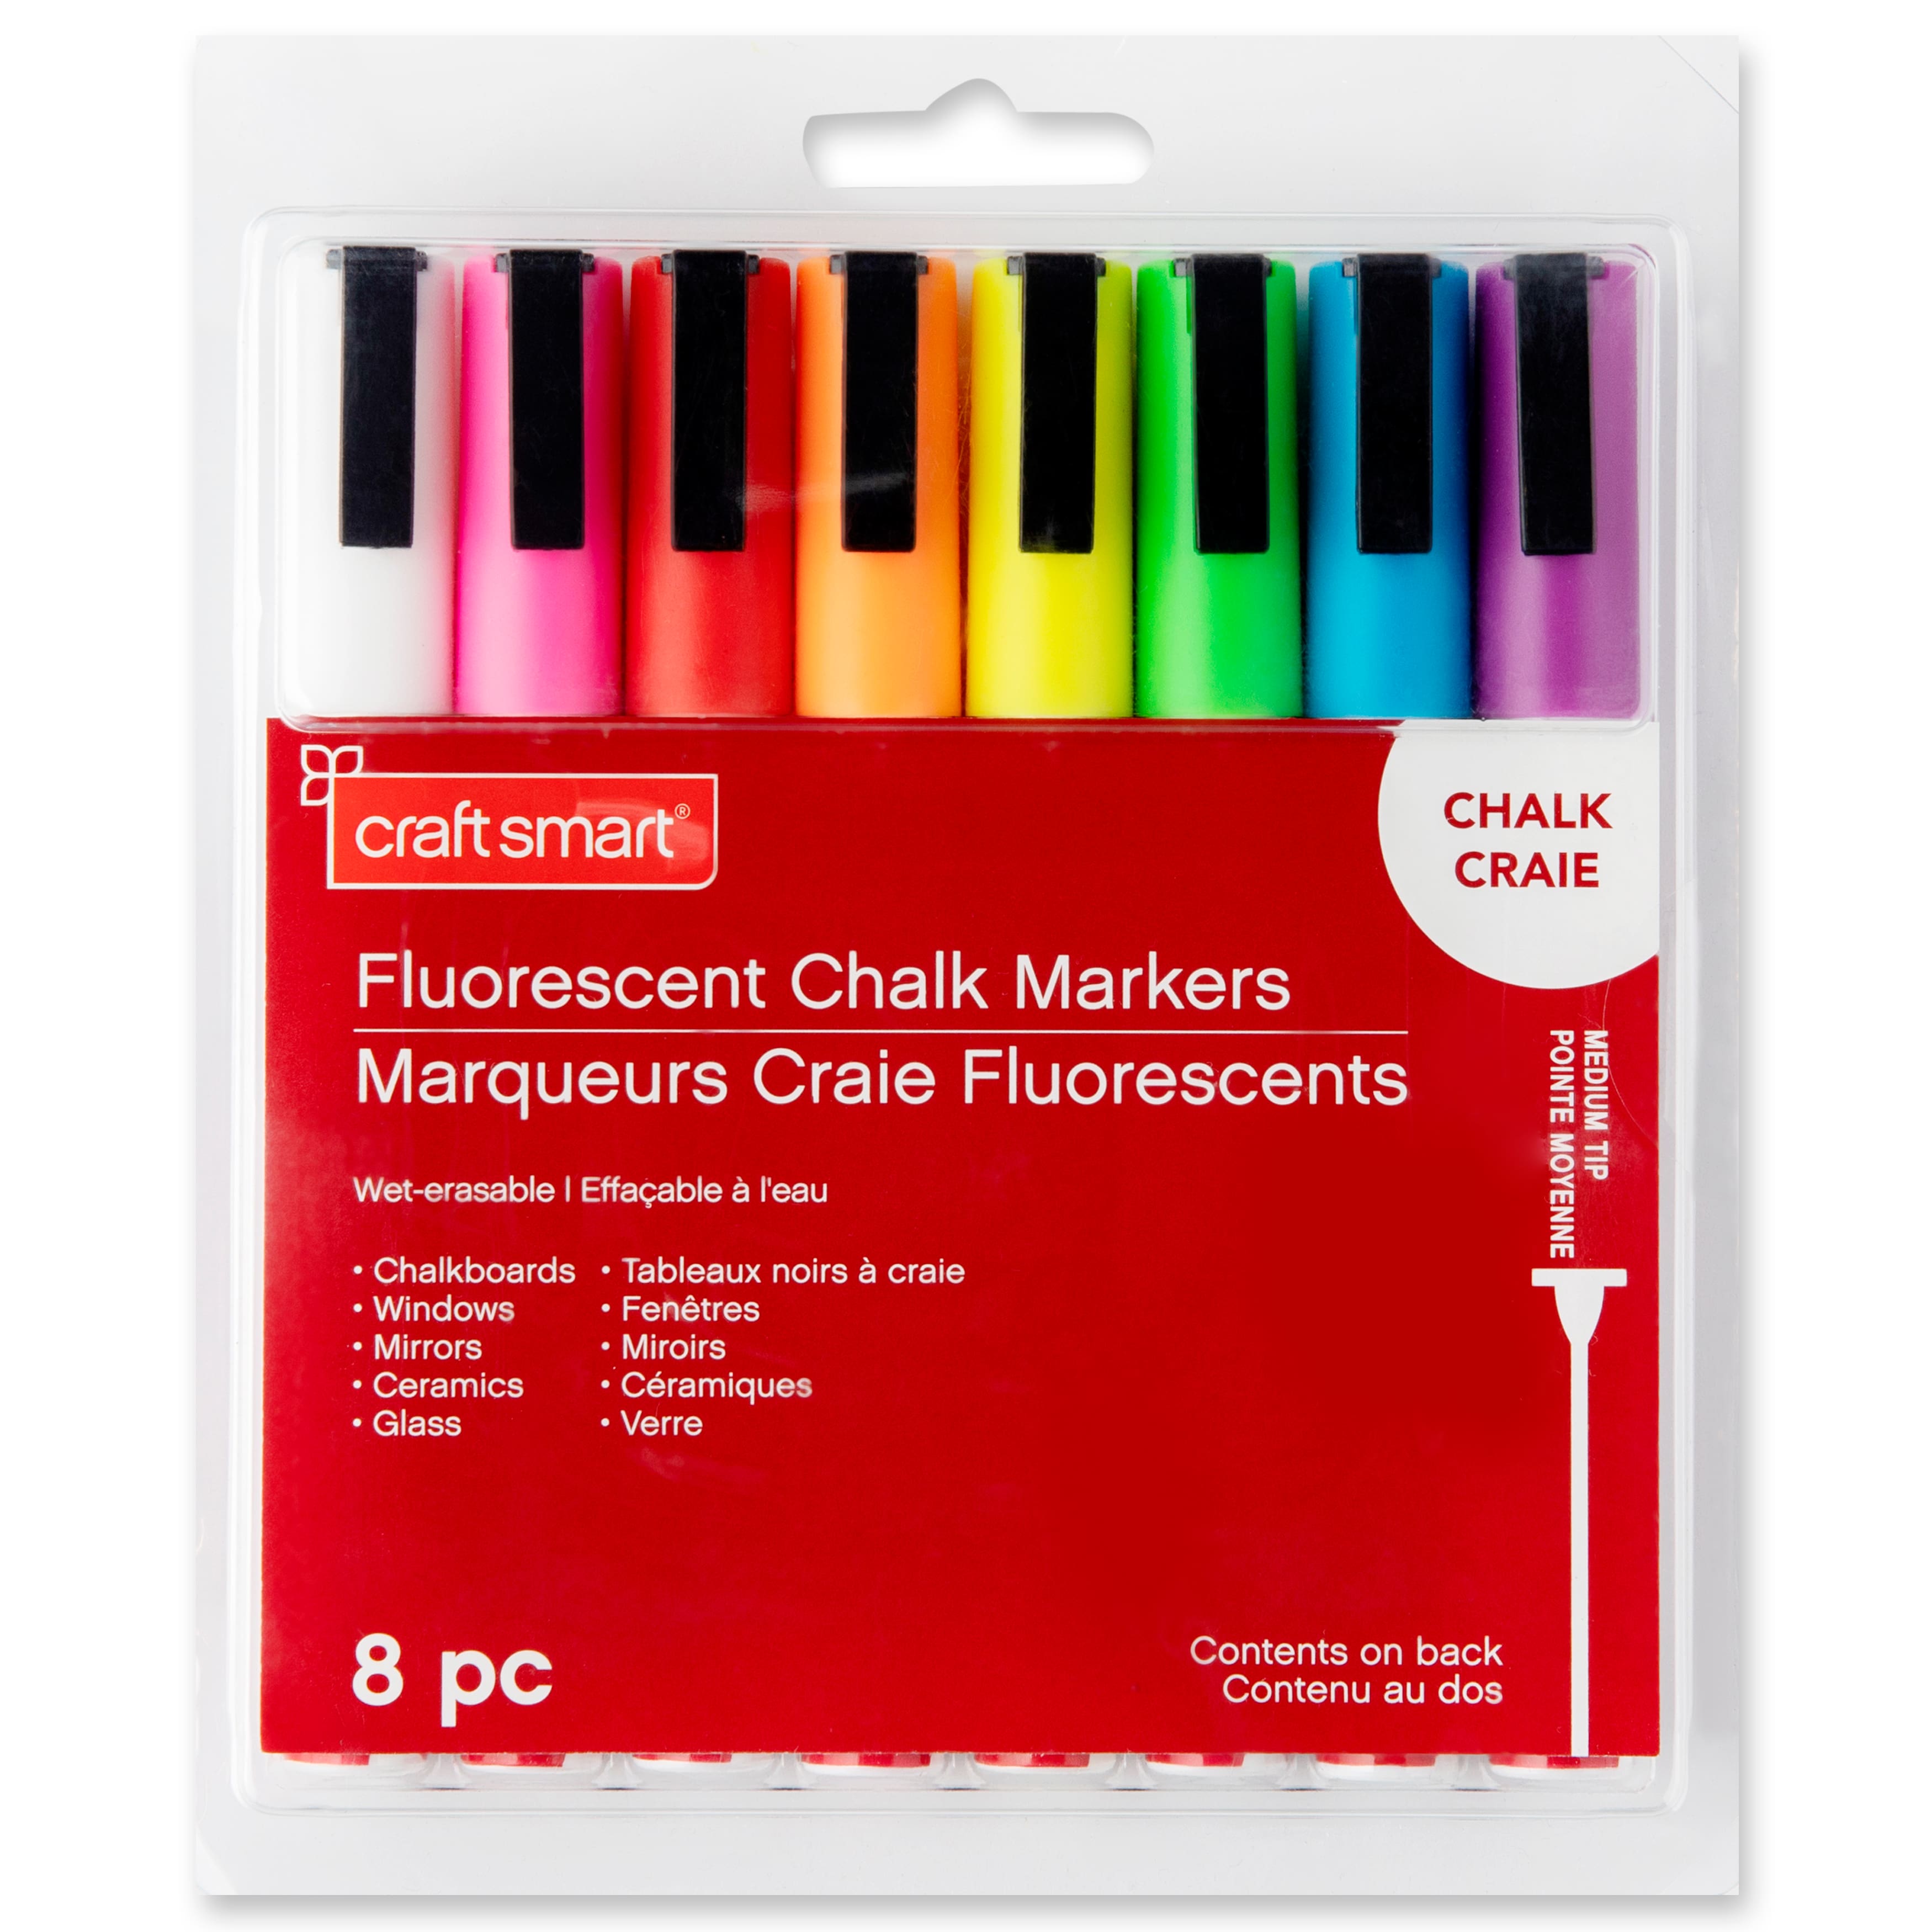 Fine Tip Chalk Markers – 10 Earth Tone Colors – Crafty Croc